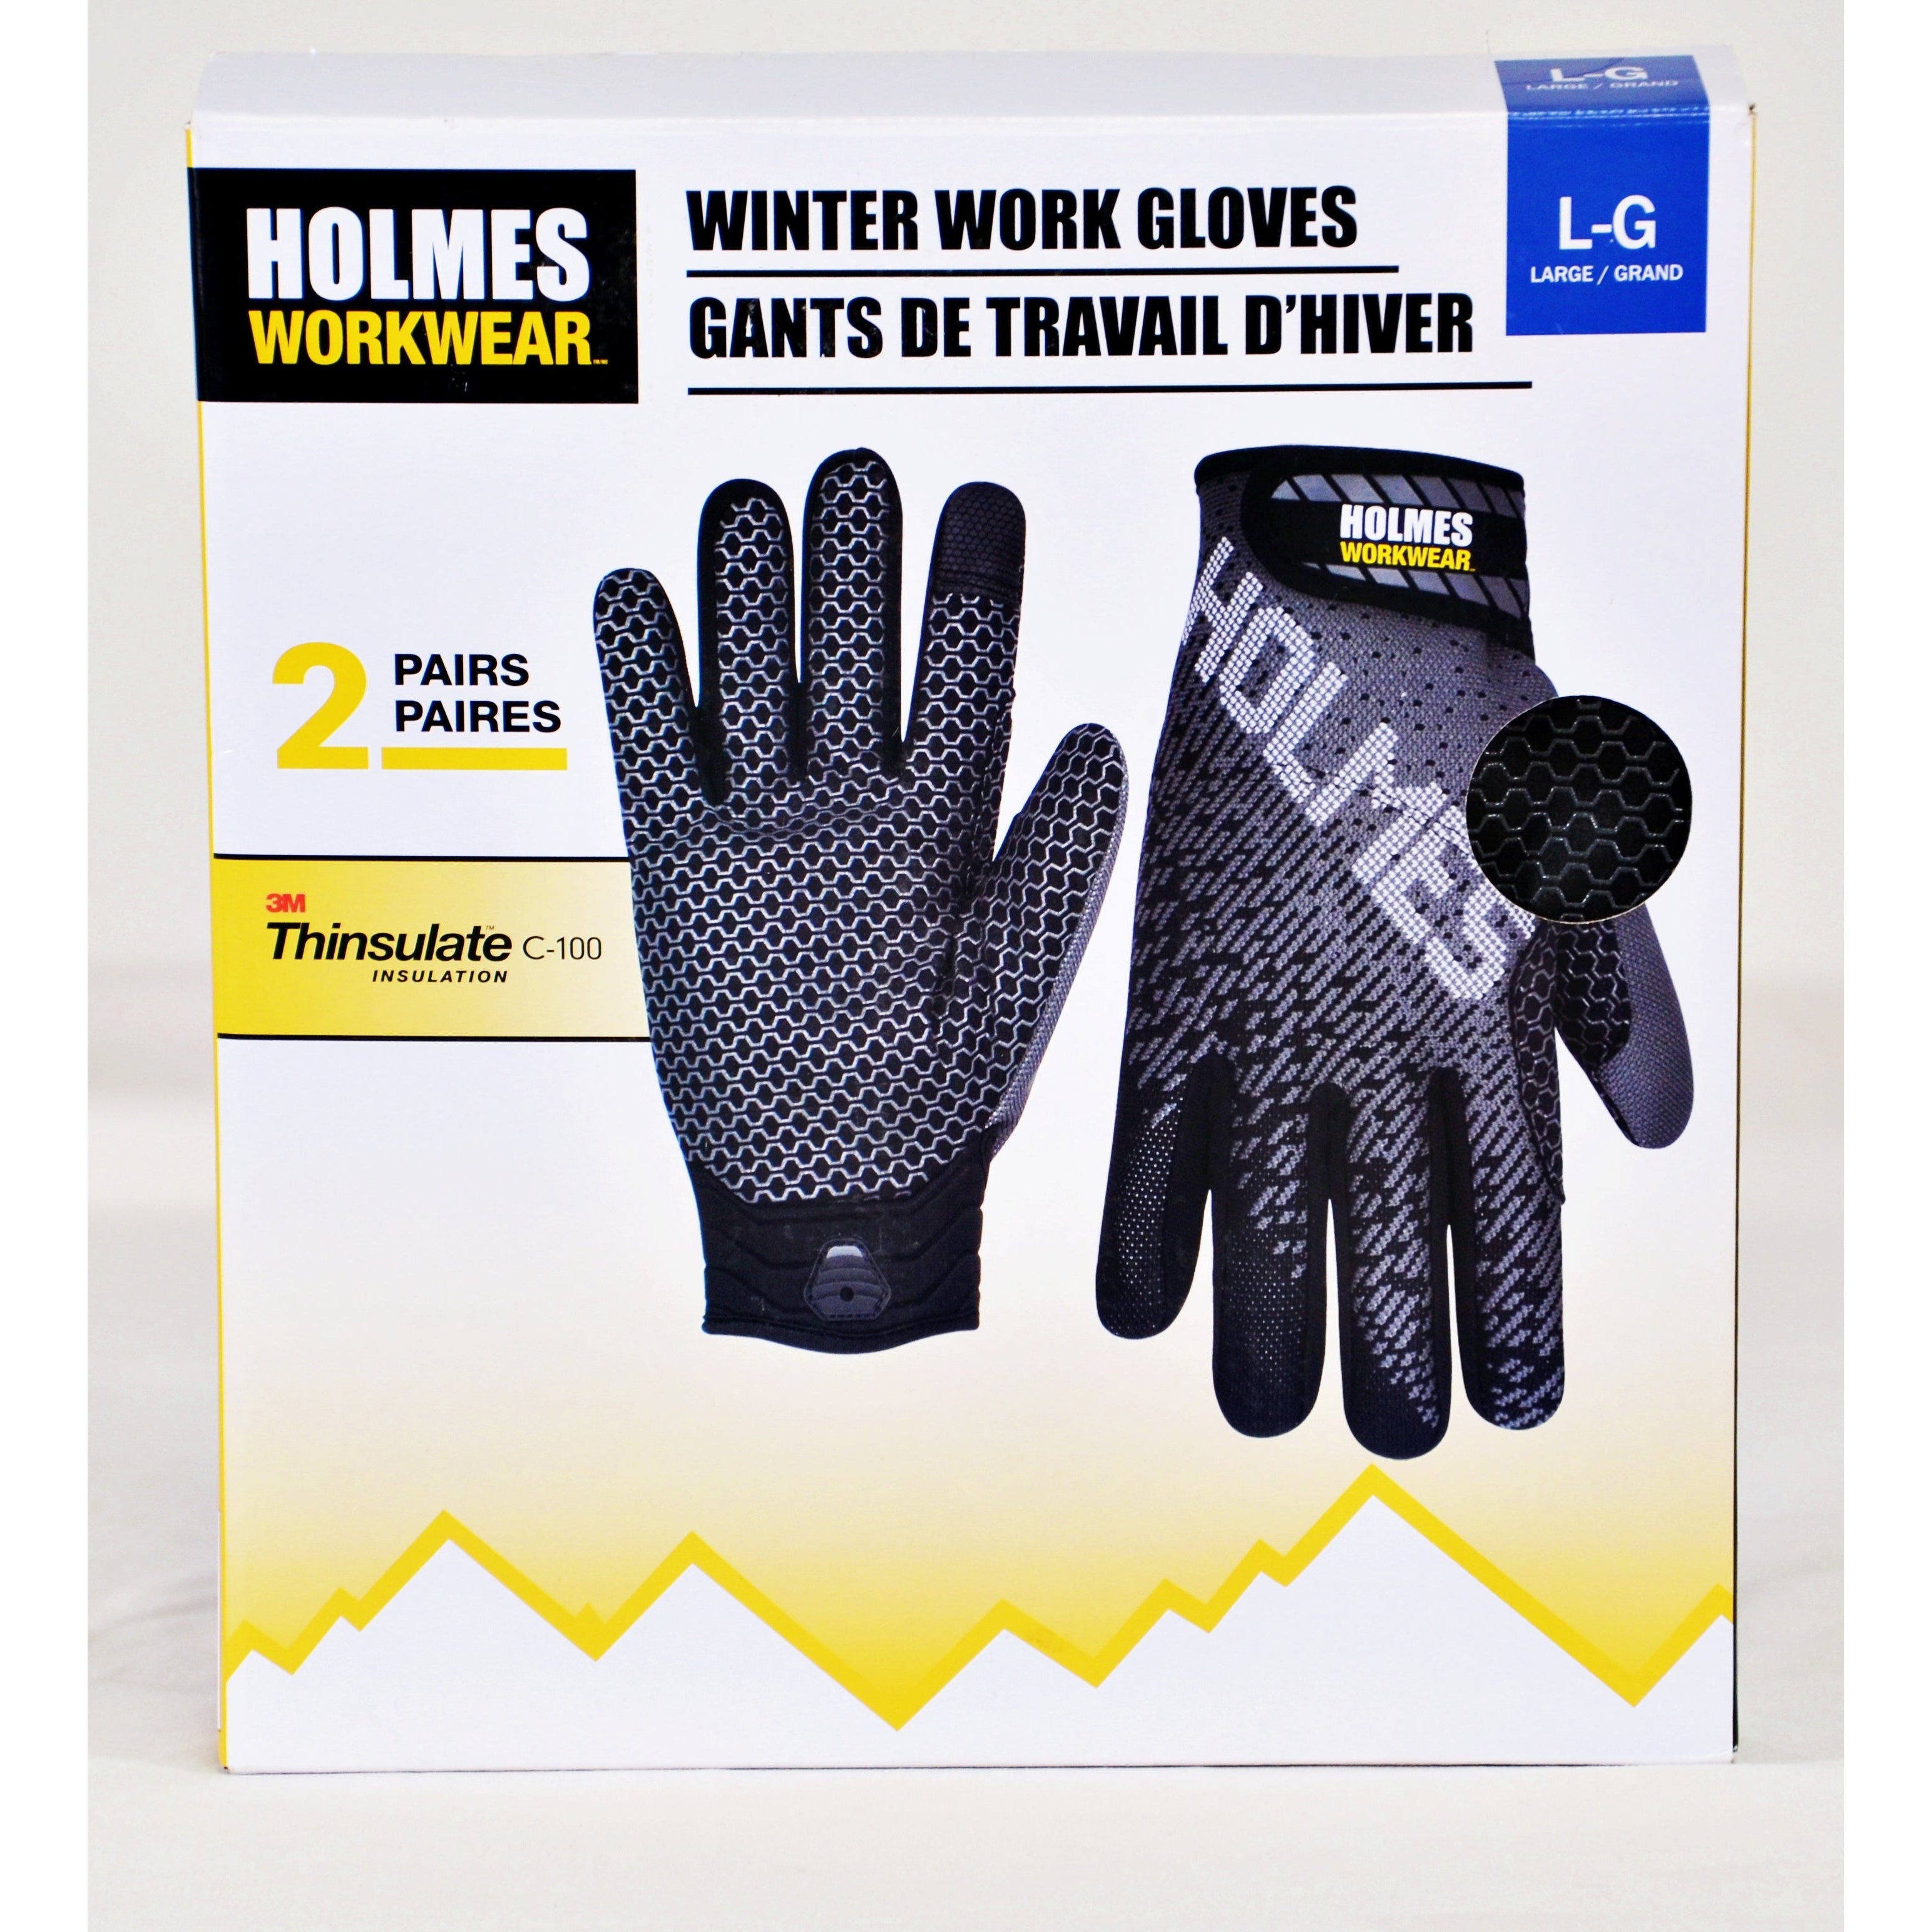 Choosing the Right Winter Work Gloves: Some Tips by WorkGlovesDepot - Issuu